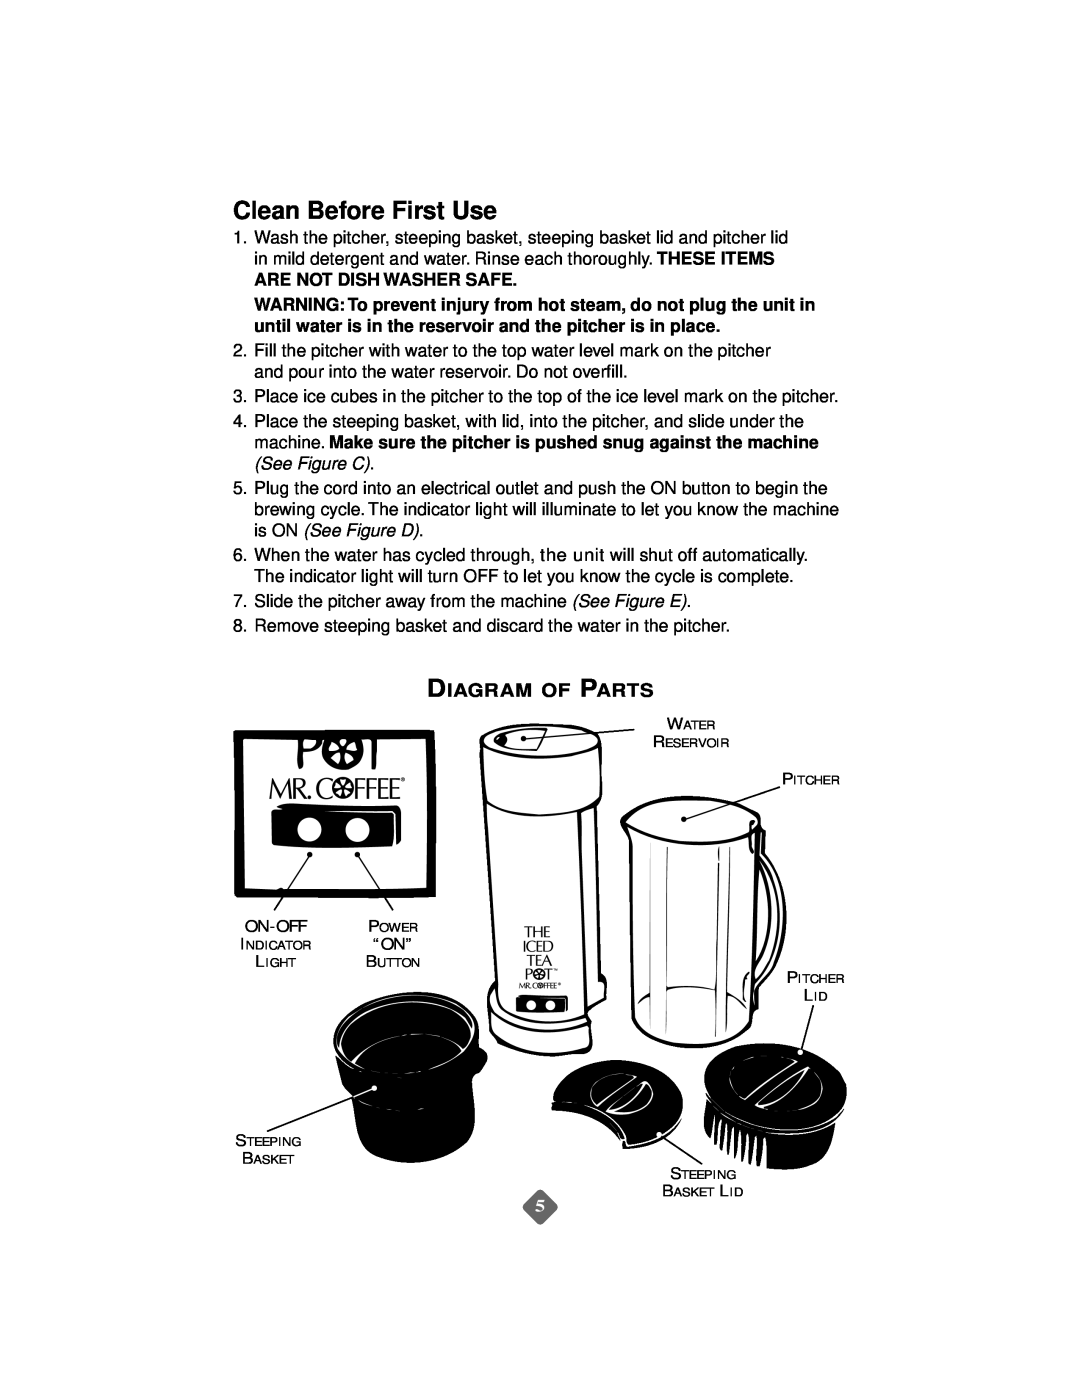 Mr. Coffee TM1 instruction manual Clean Before First Use, Diagram Of Parts, Are Not Dish Washer Safe 